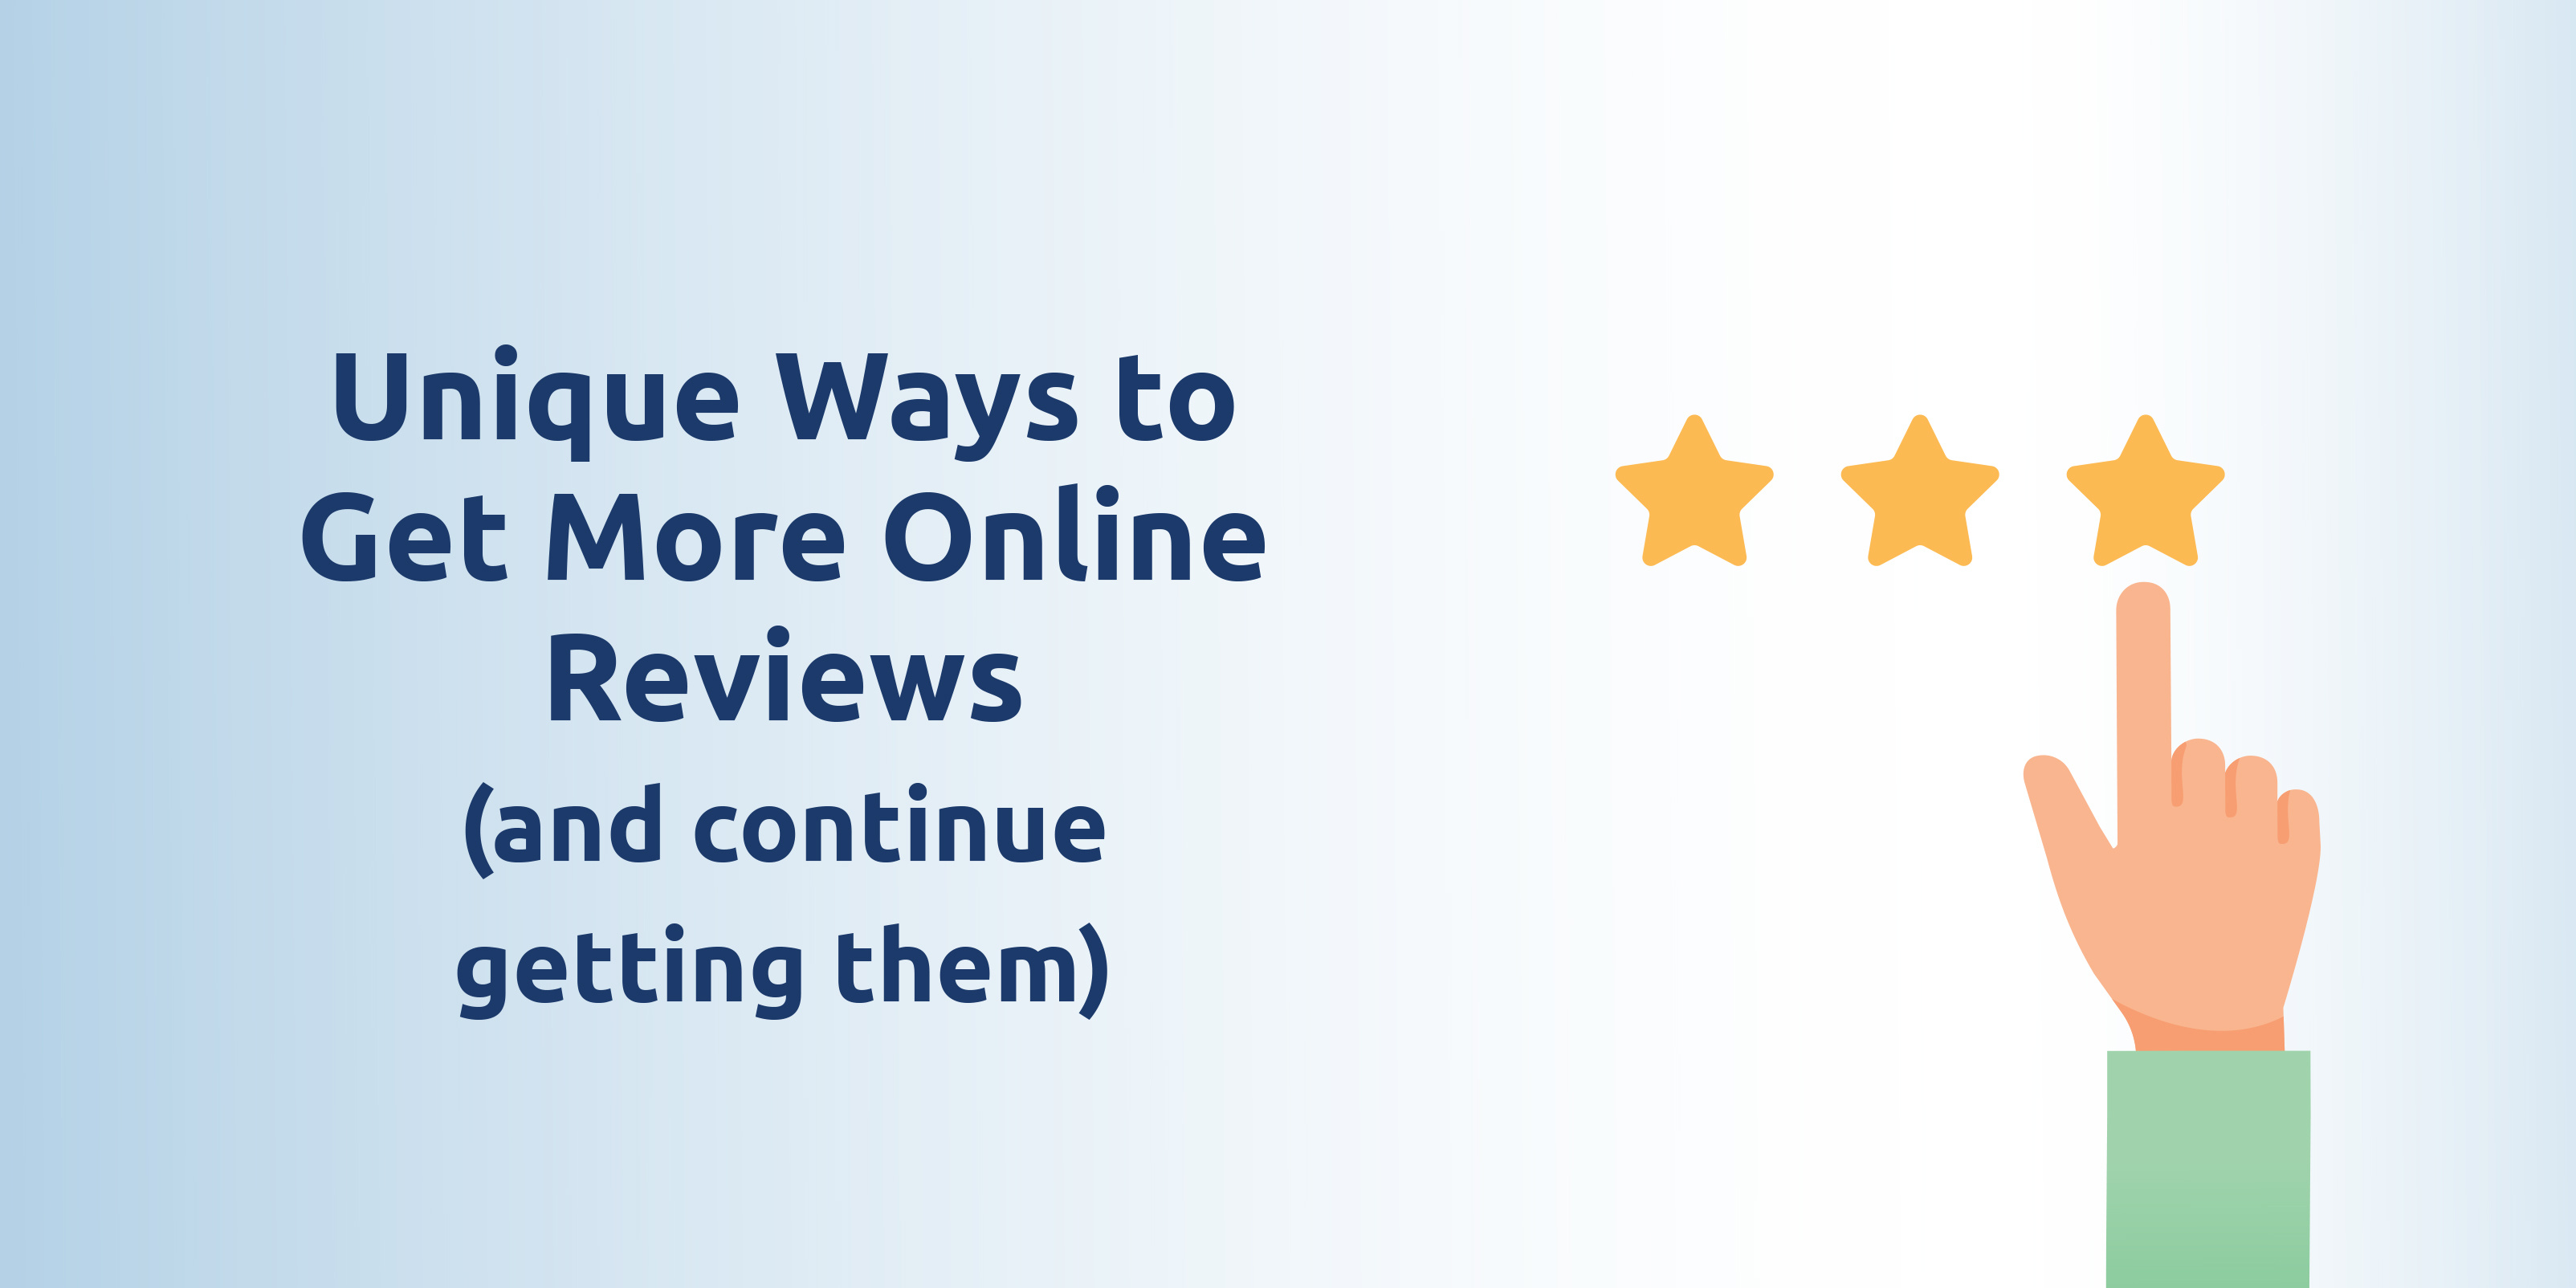 Unique ways to get more online reviews (and continue getting them)